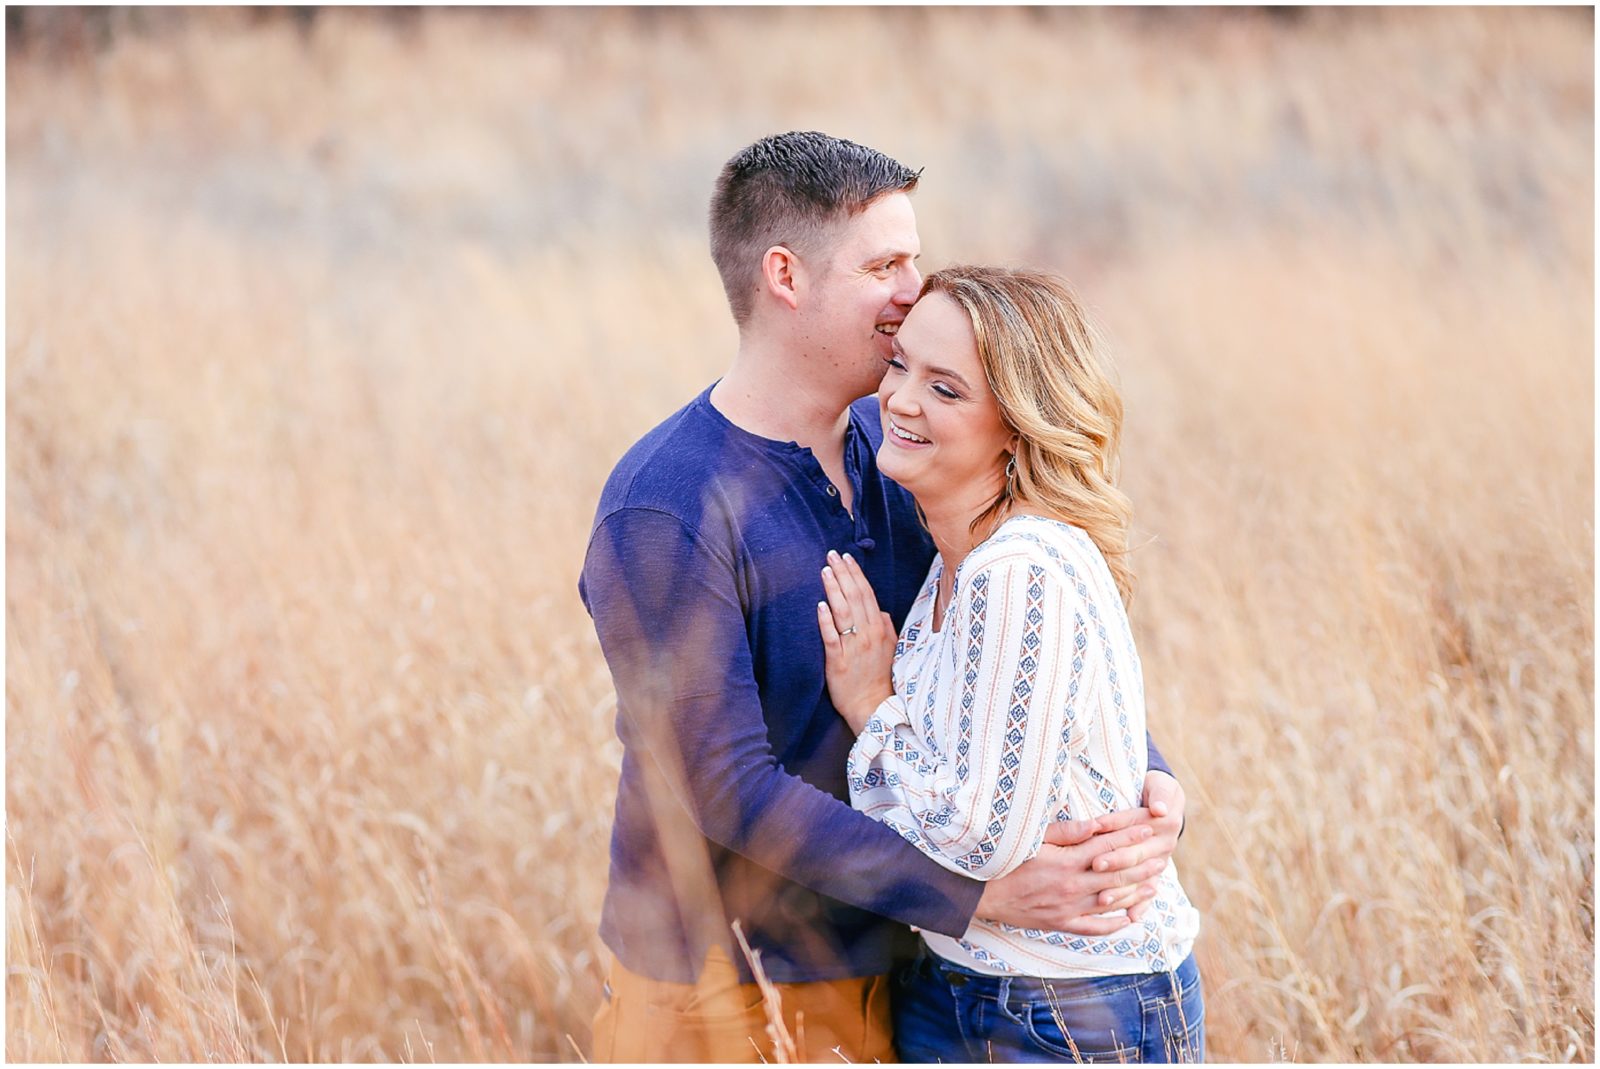 laughing couple - engagement session in kansas city - wedding photographer overland park and leawood 